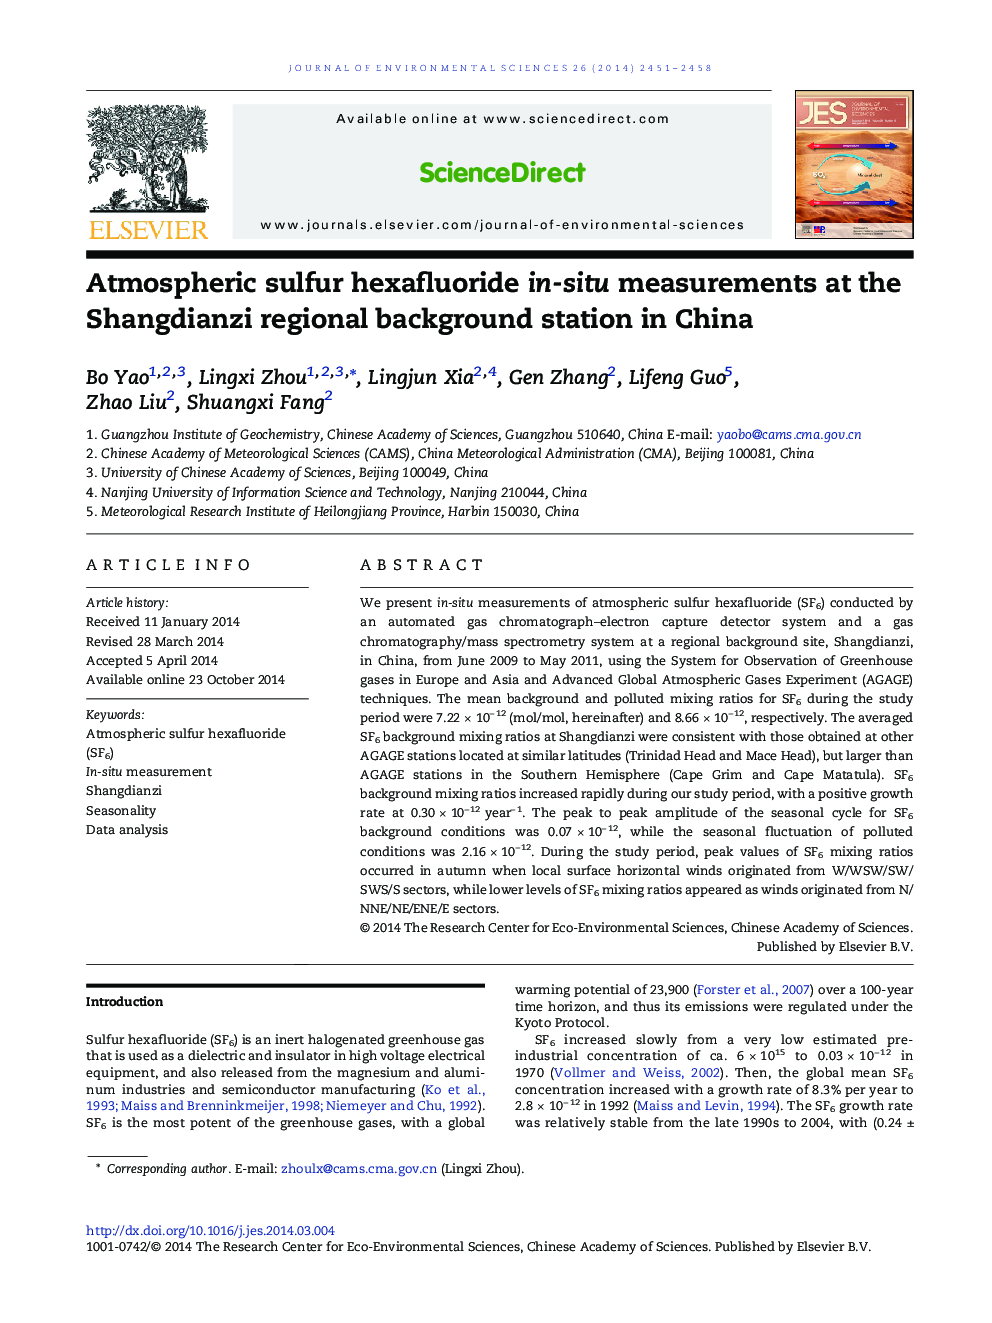 Atmospheric sulfur hexafluoride in-situ measurements at the Shangdianzi regional background station in China